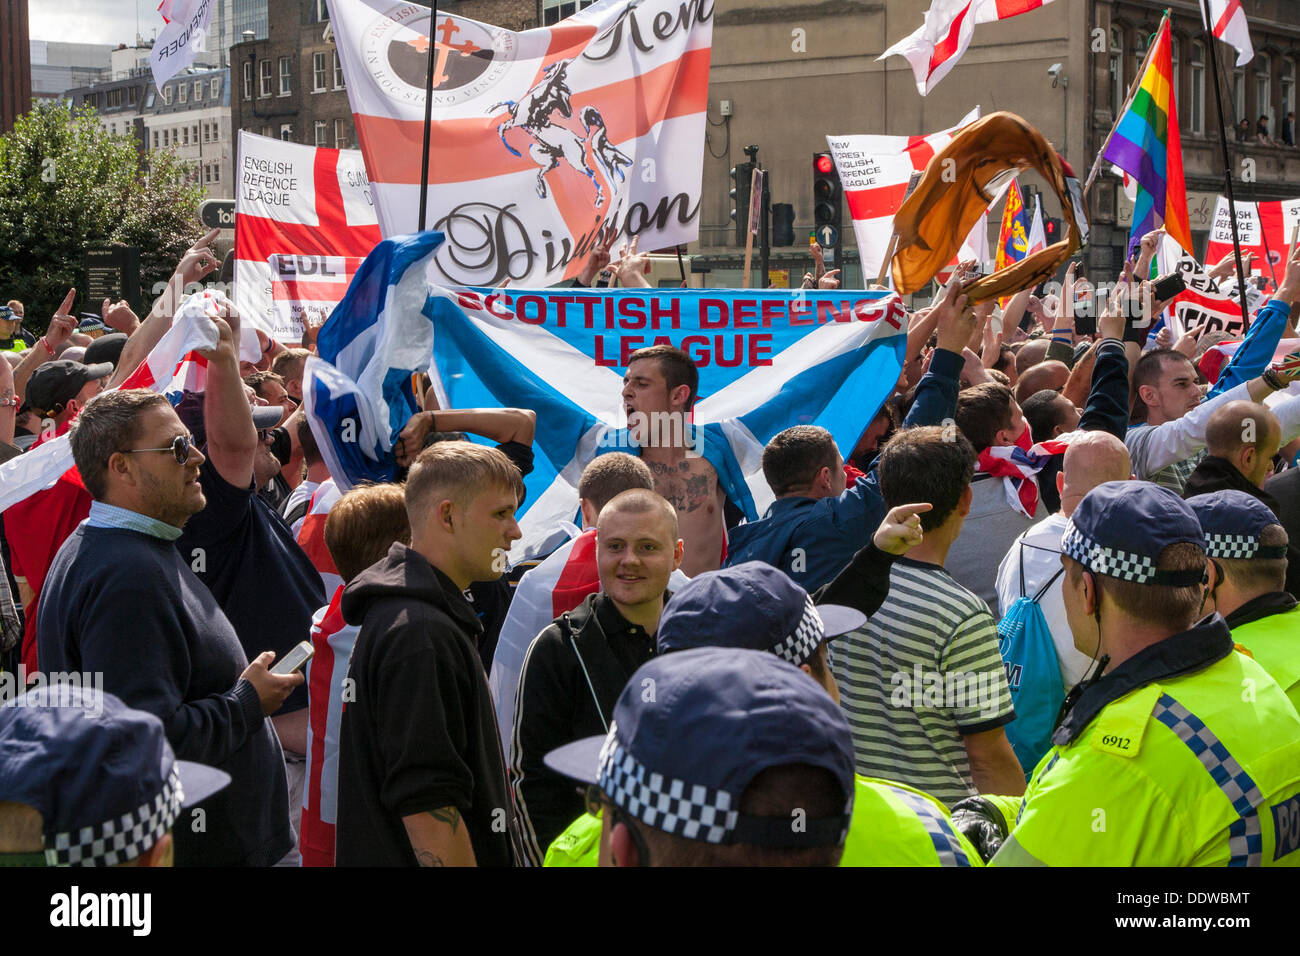 London, UK. 07th Sep, 2013. A member of the Scottish Defence Leage spreads his flag as several hundred English Defence League supporters marched over Tower Bridge to a short rally outside Aldgate station on the edge of the borough of Tower Hamlets. Credit:  Paul Davey/Alamy Live News Stock Photo